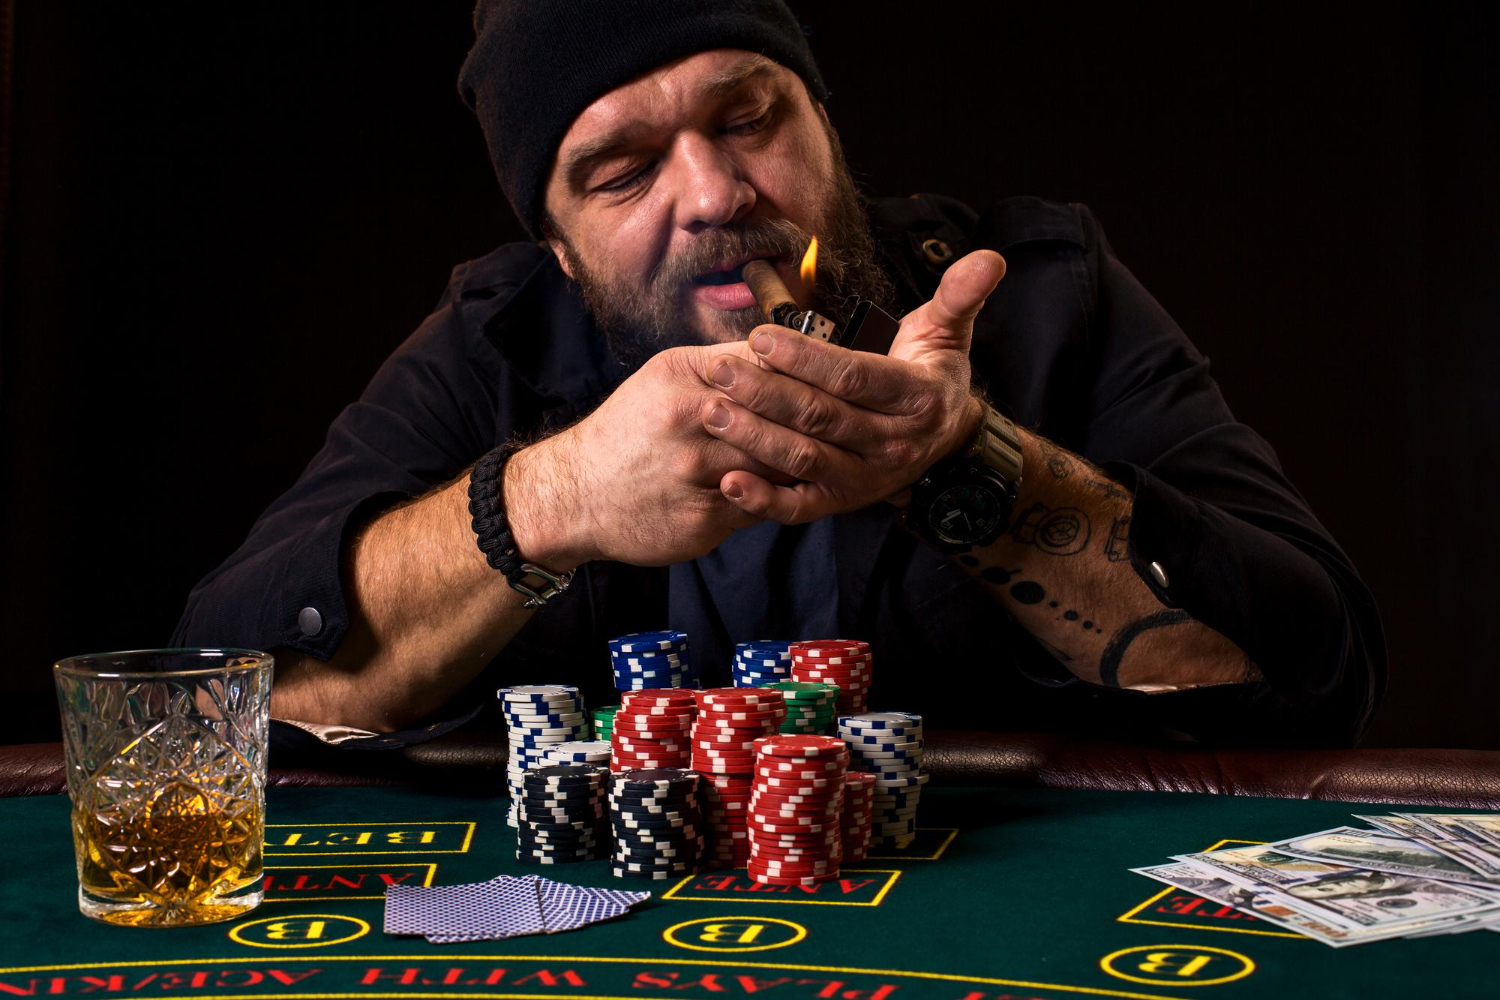 bearded-man-with-cigar-glass-sitting-poker-table-casino-gambling-playing-cards-roulette-green-poker-table-are-cards-chips-money-whole-room-is-smoke-from-cigars